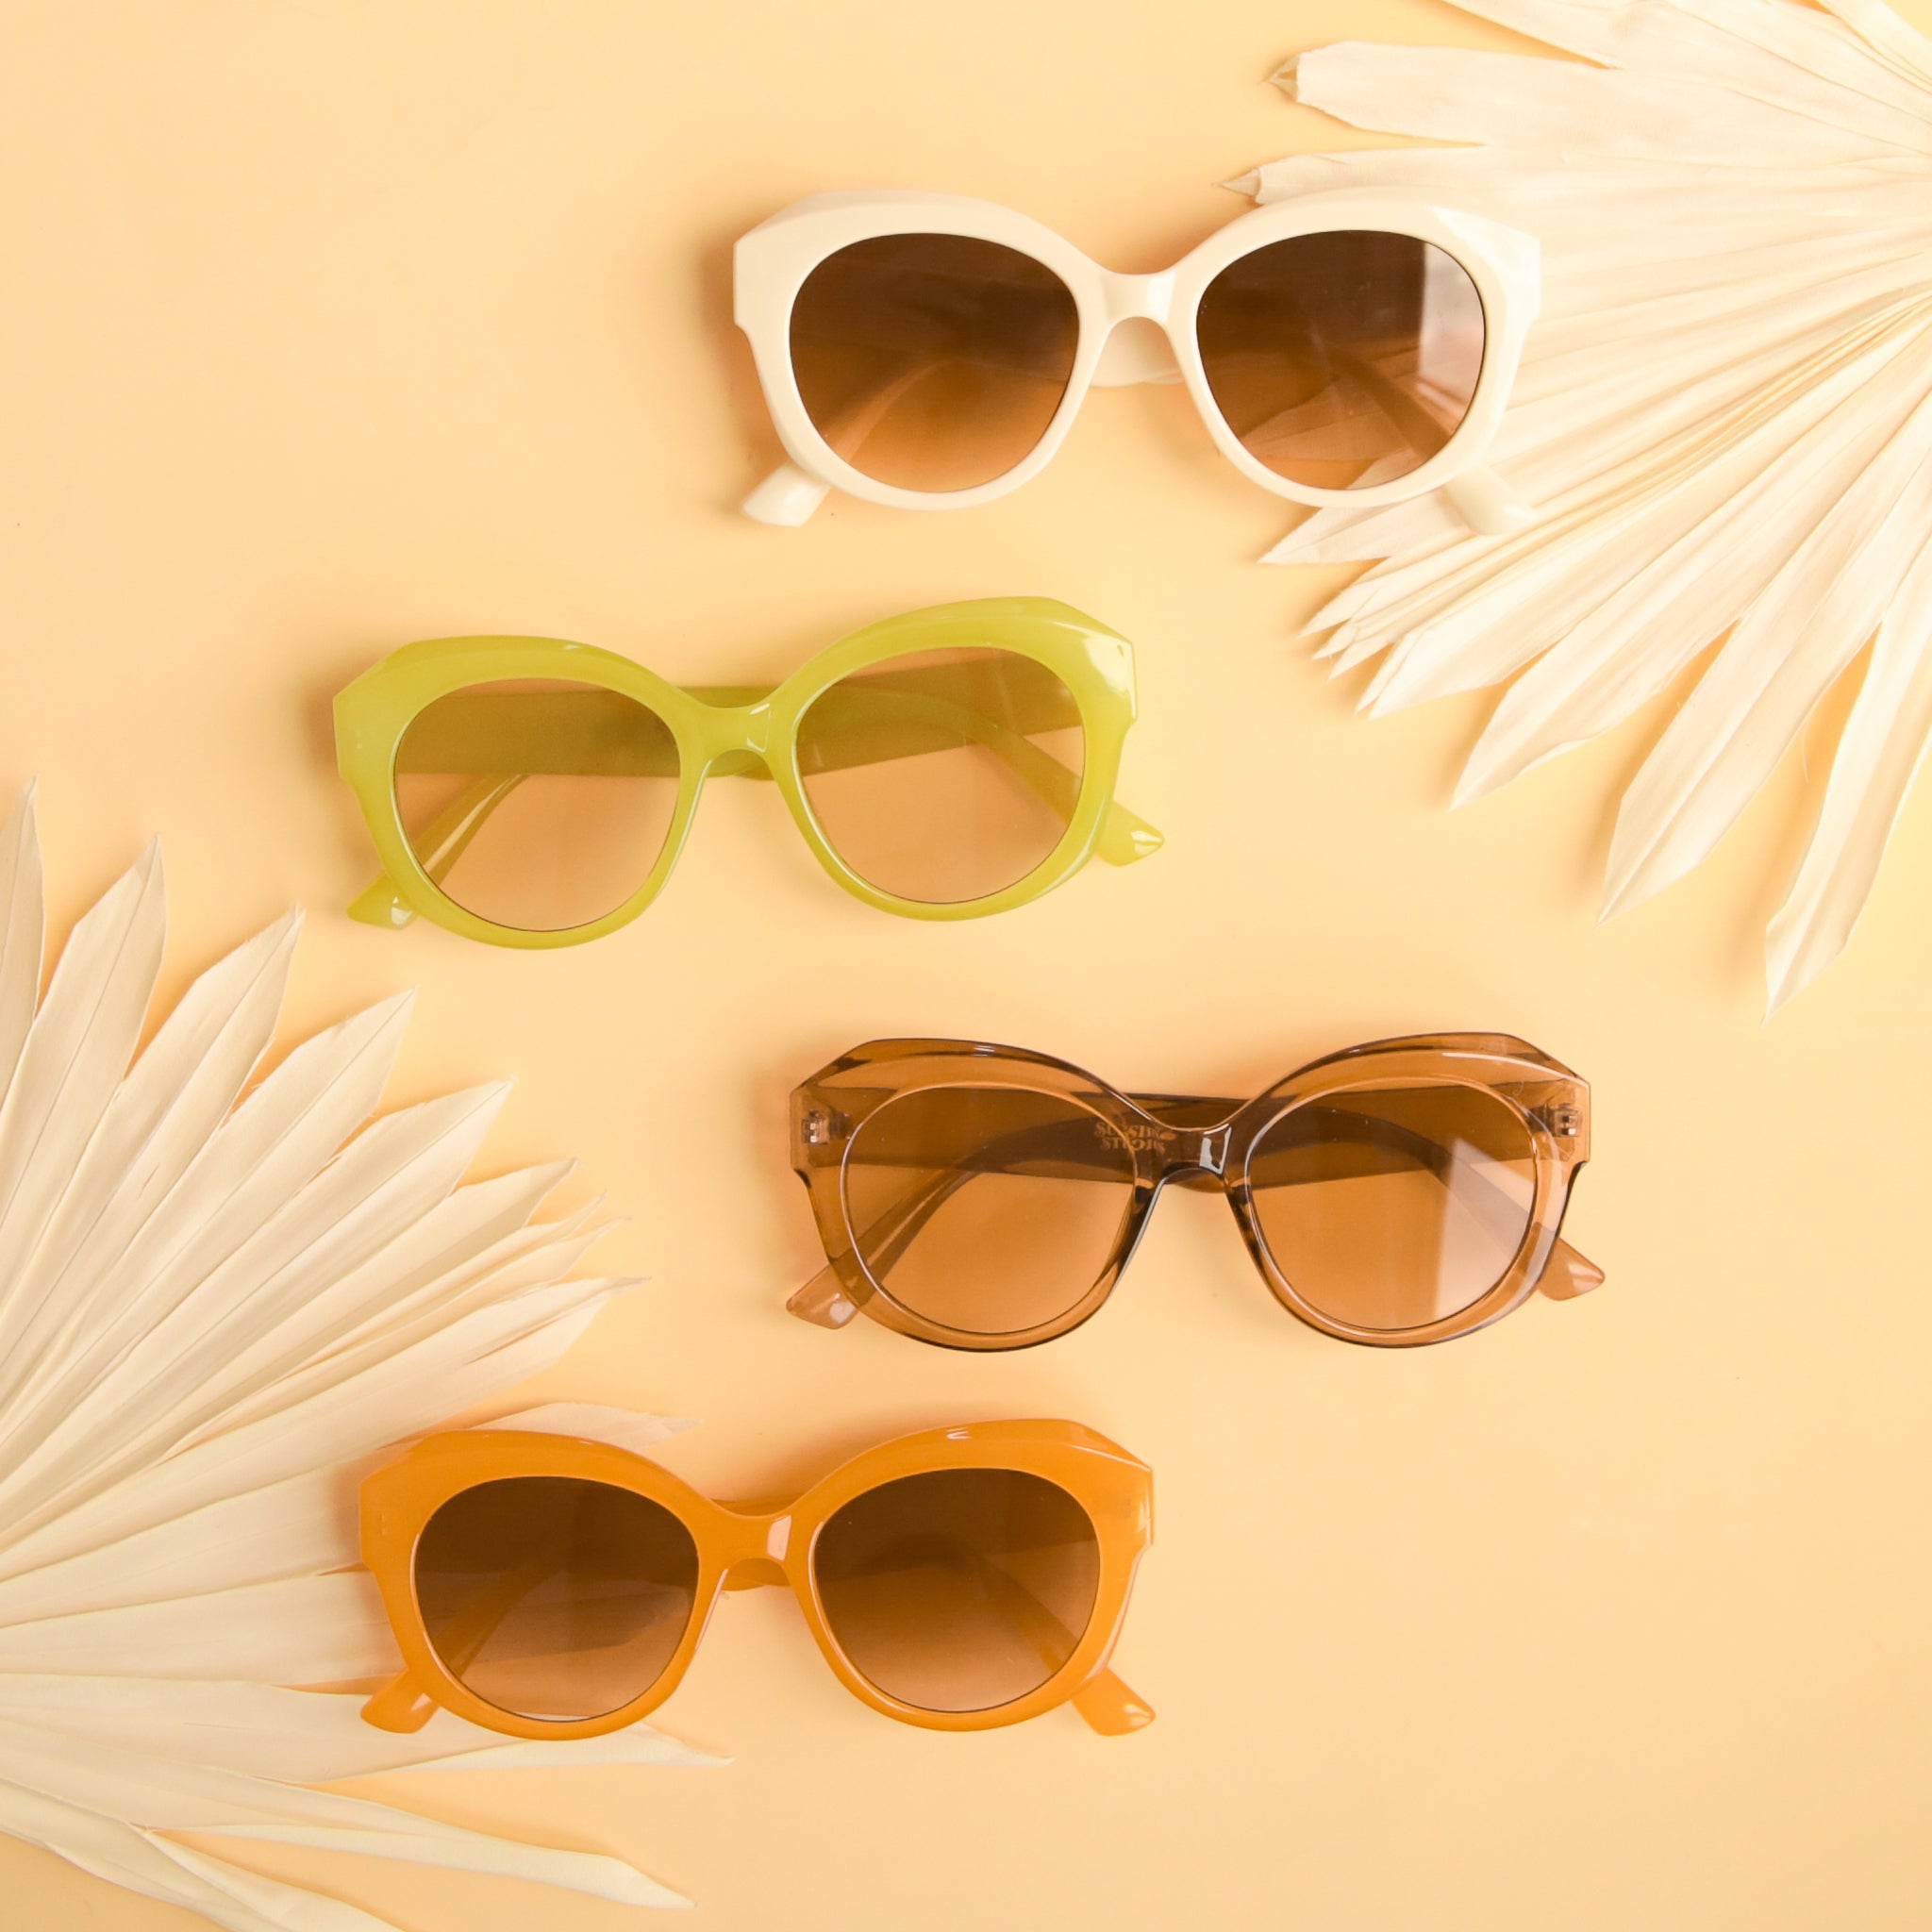 four pairs of retro styled sunglasses in multiple colors lies on a soft yellow ground with white dried palms